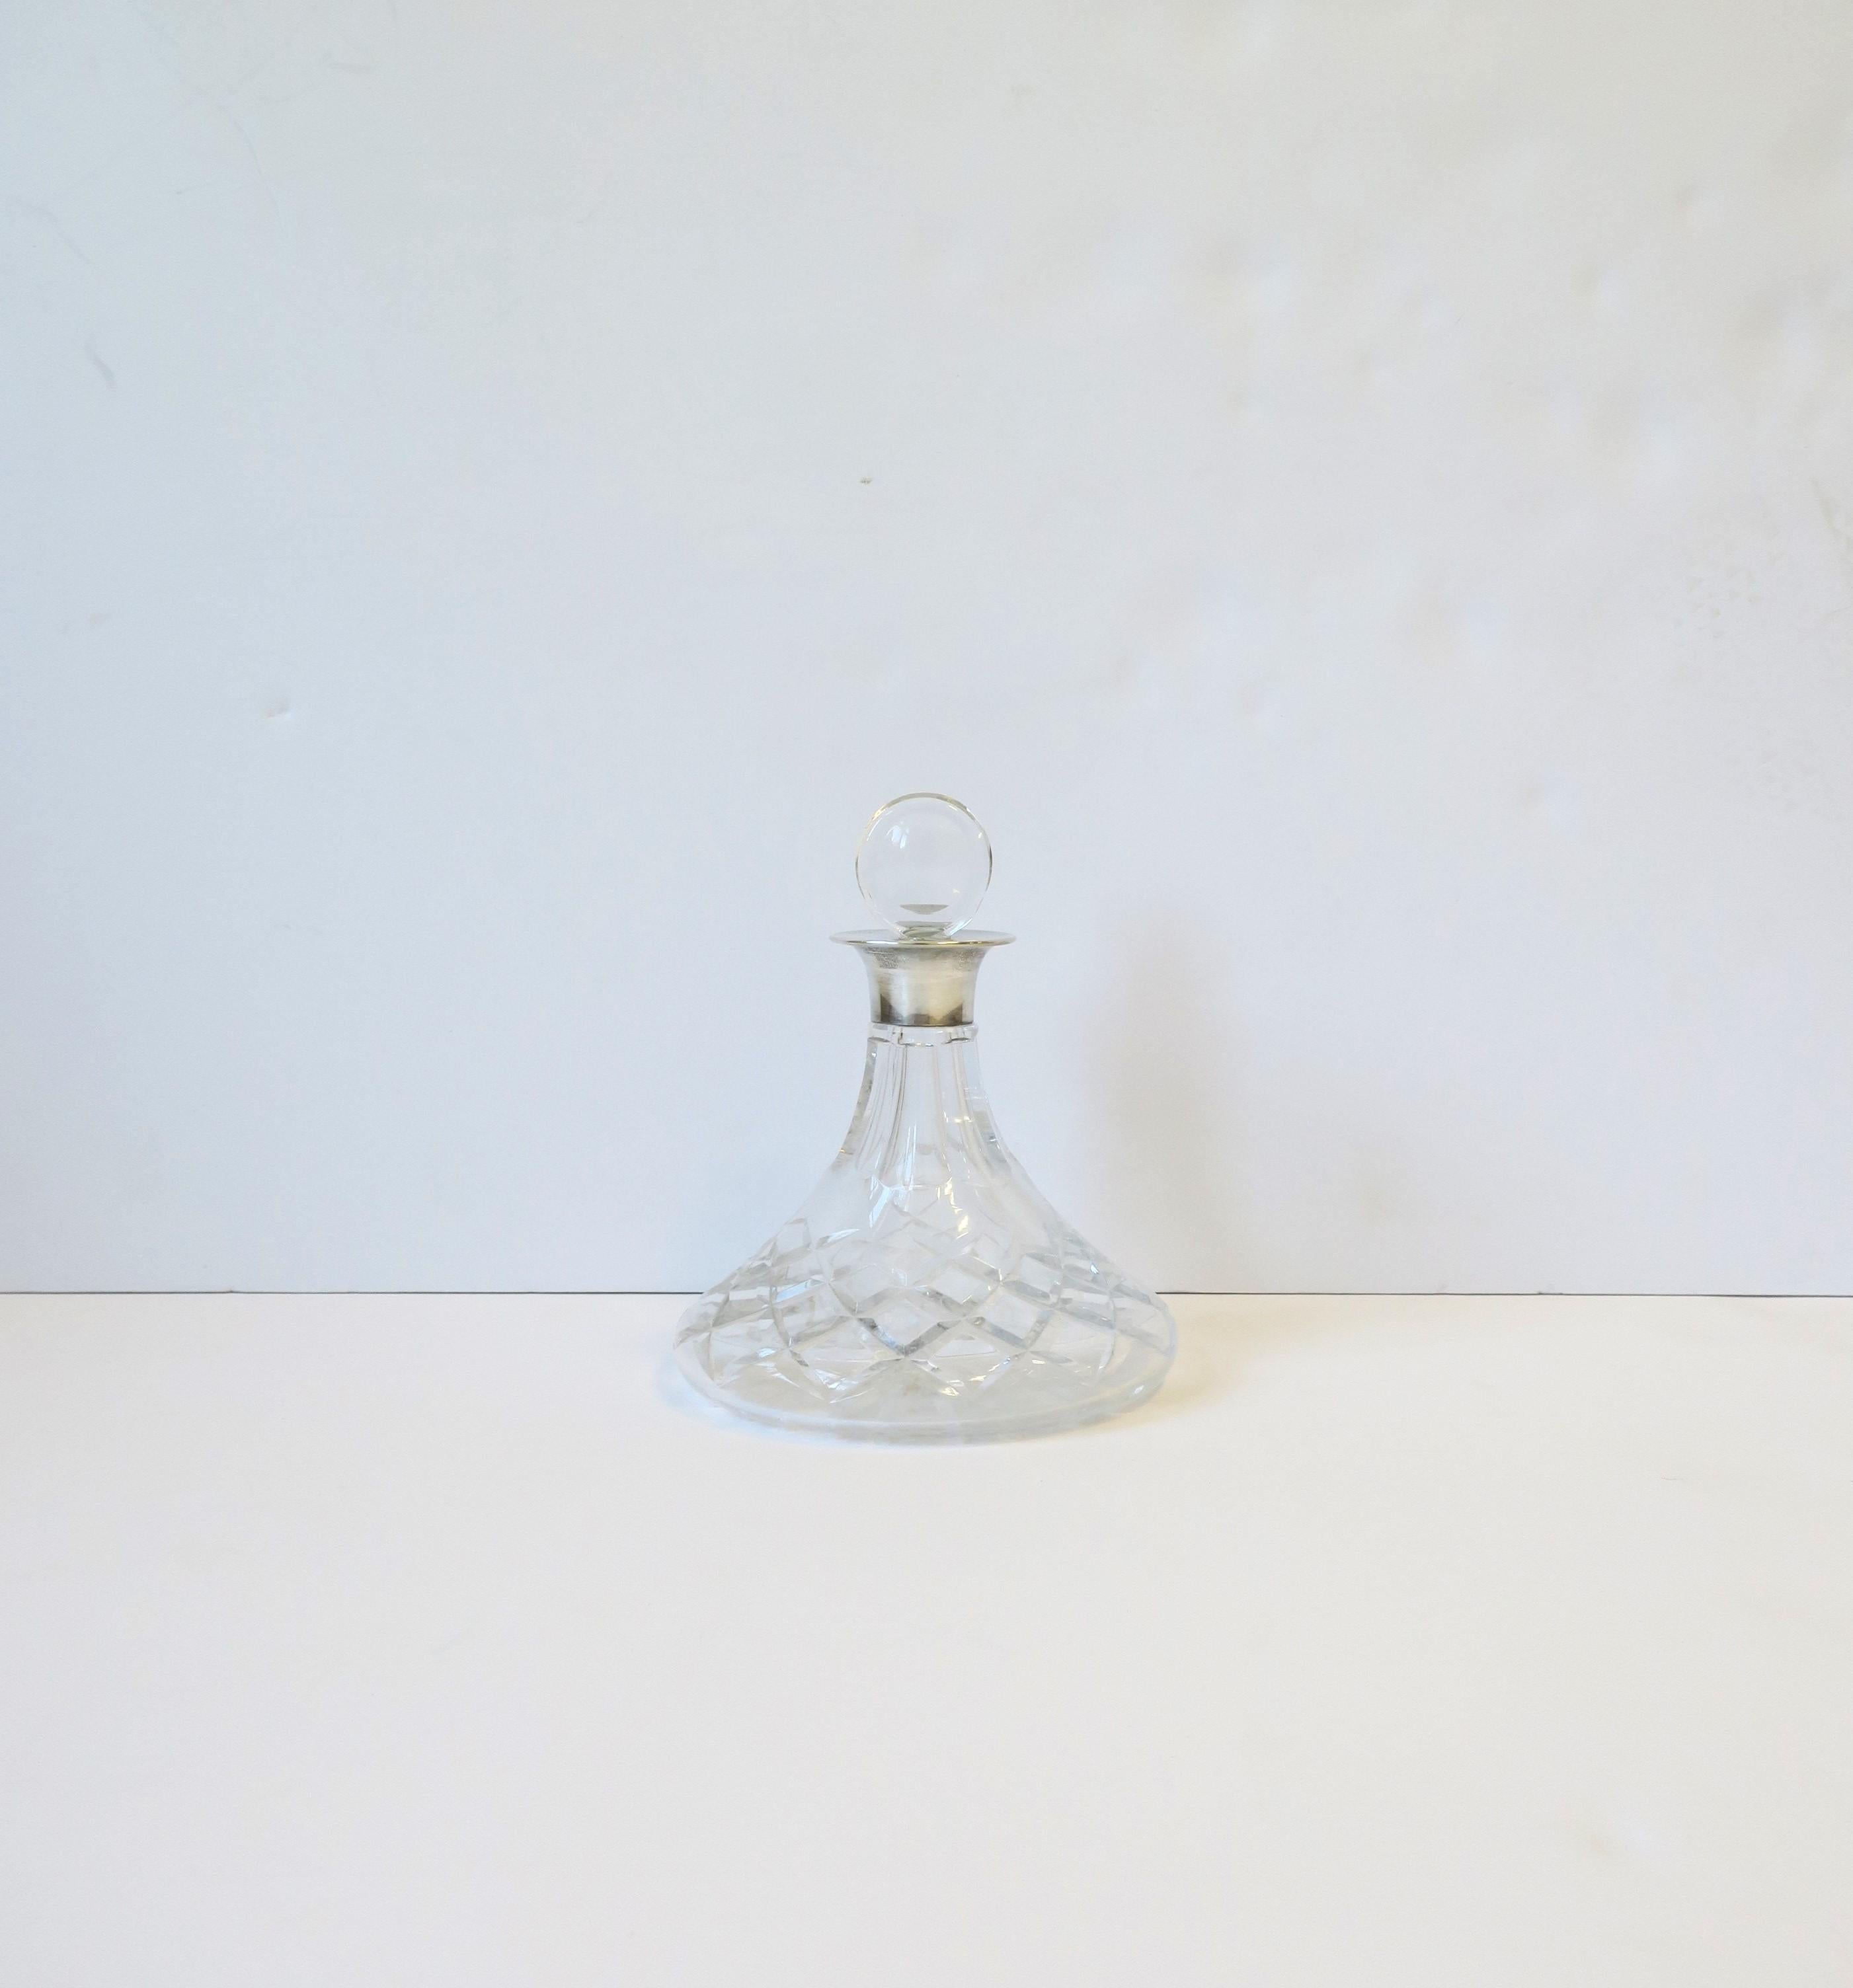 An English sterling silver and crystal spirits decanter, circa 20th century, England. A beautiful cut crystal spirits decanter with silver mount and crystal stopper. Decanter is a convenient size too measuring 5.63